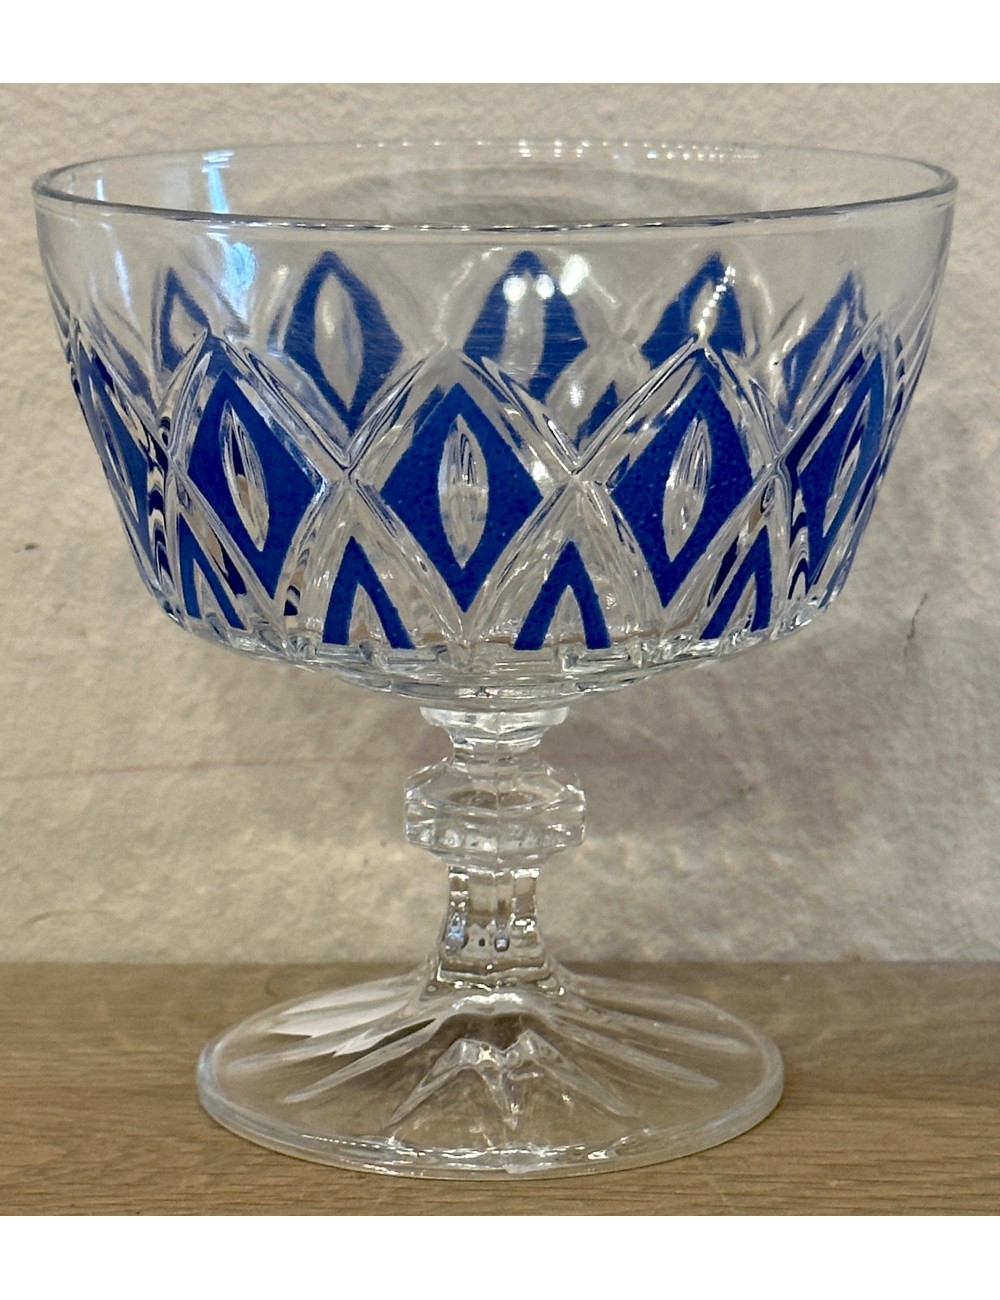 Ice coupe / Plate - VMC Reims (Verreries Mécanques Champenoises) - in blue executed glass